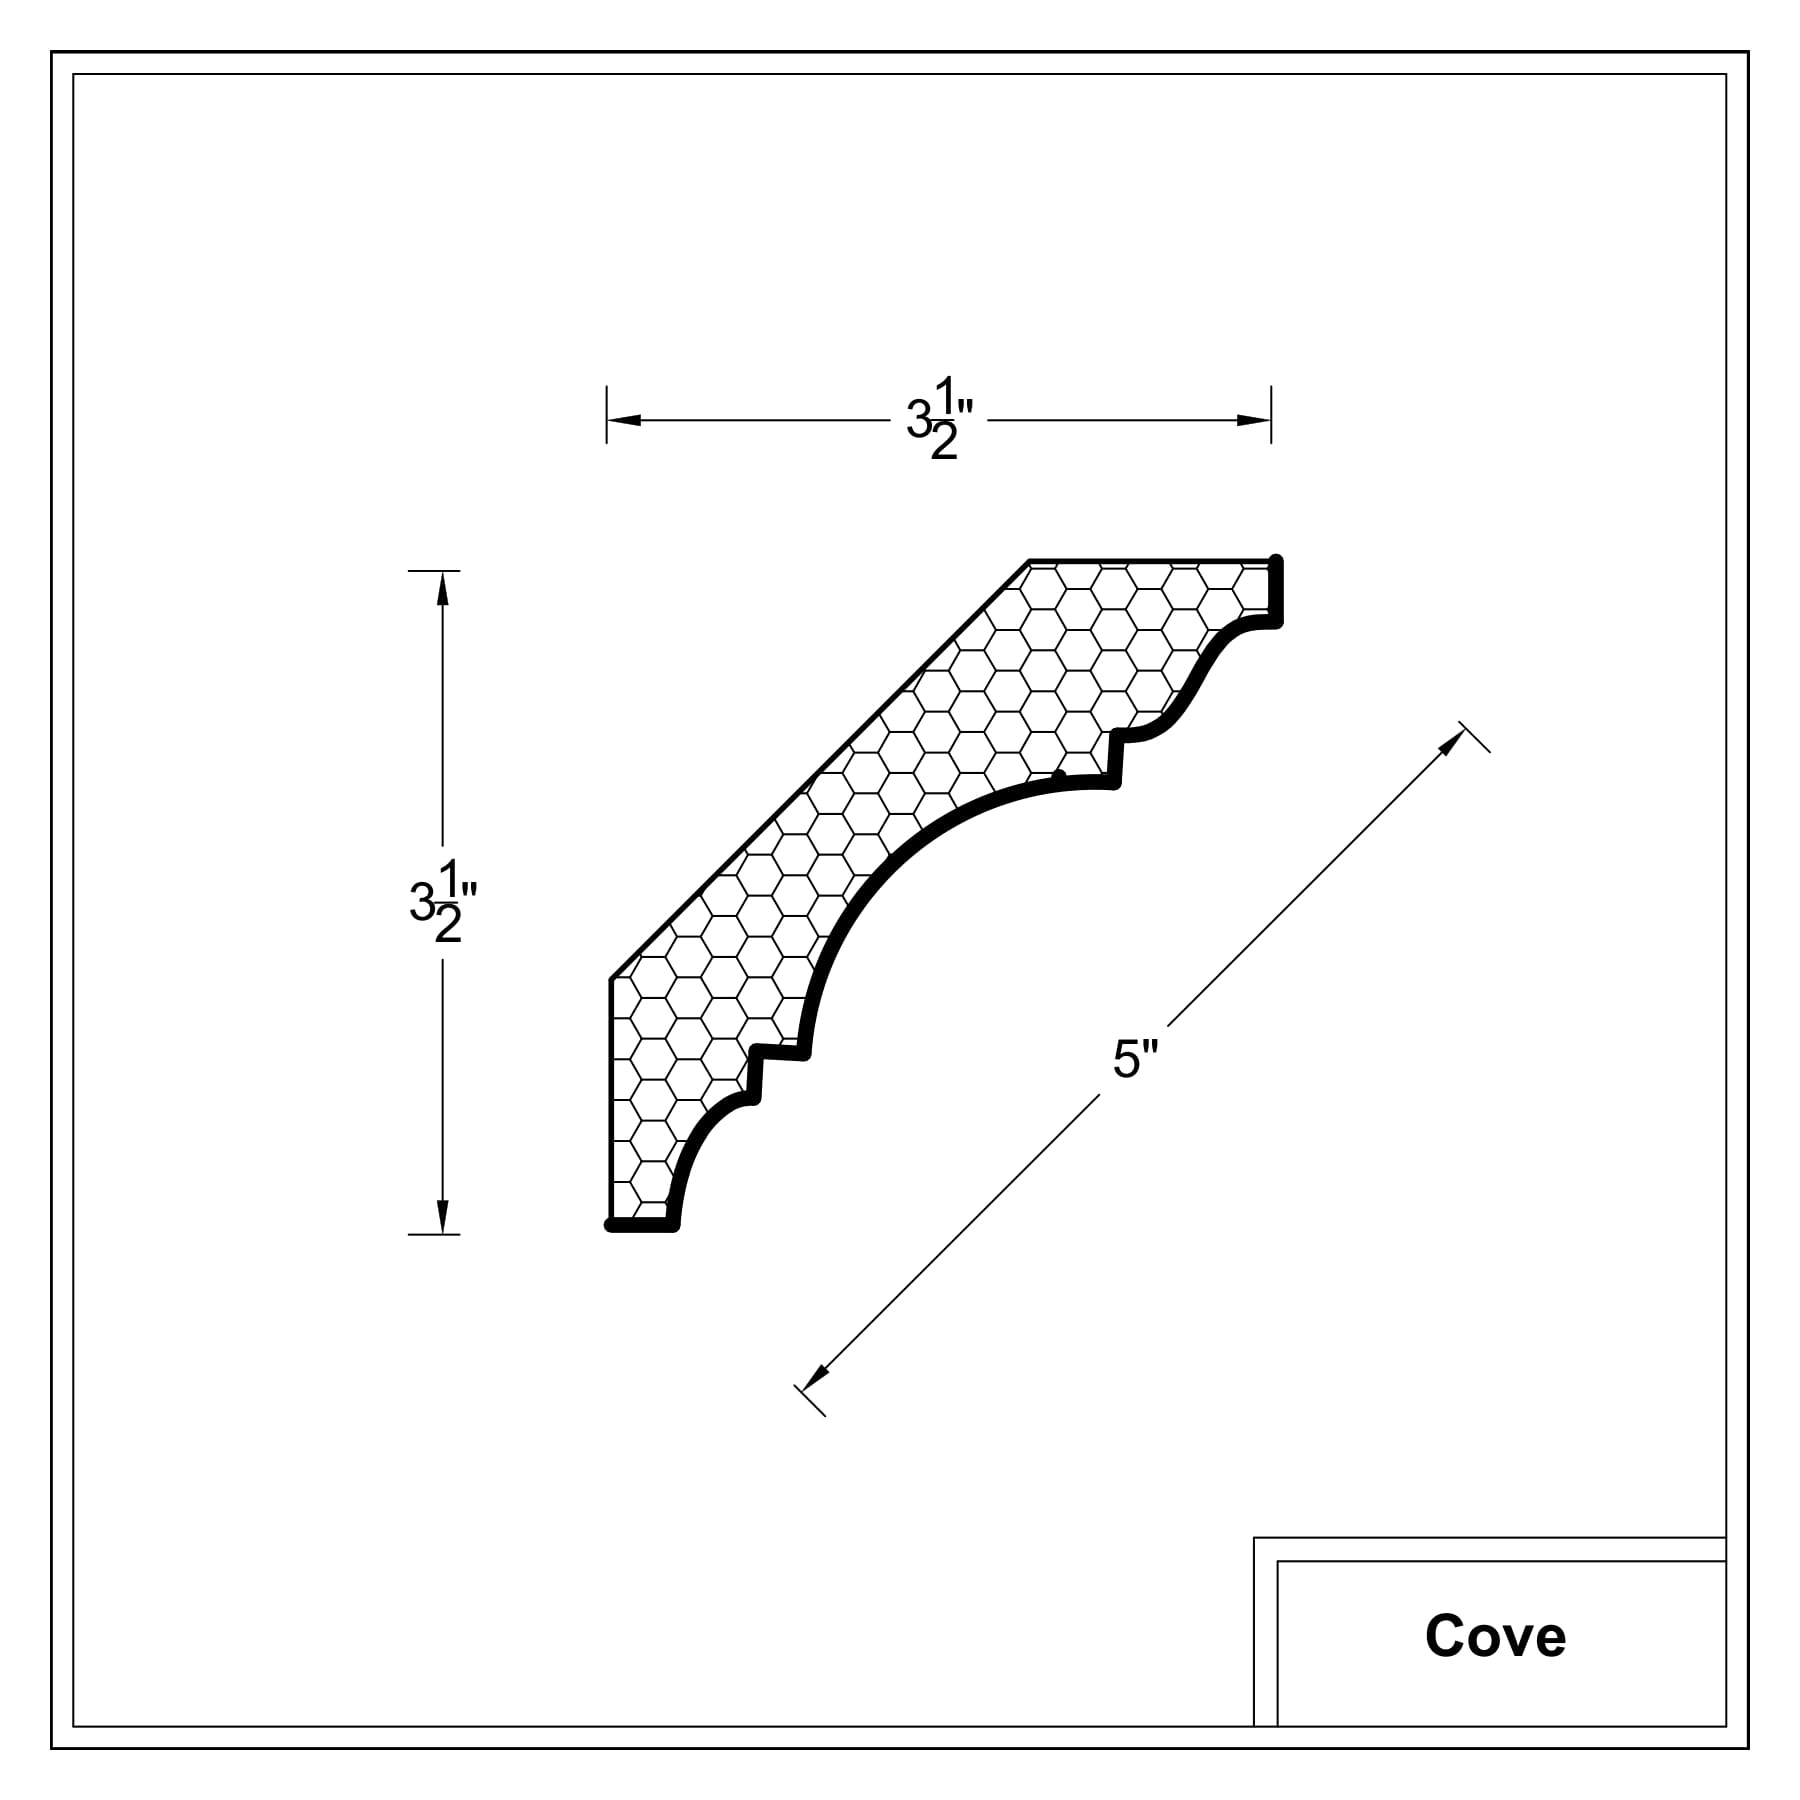 Crown moulding - Cove Cross Sections